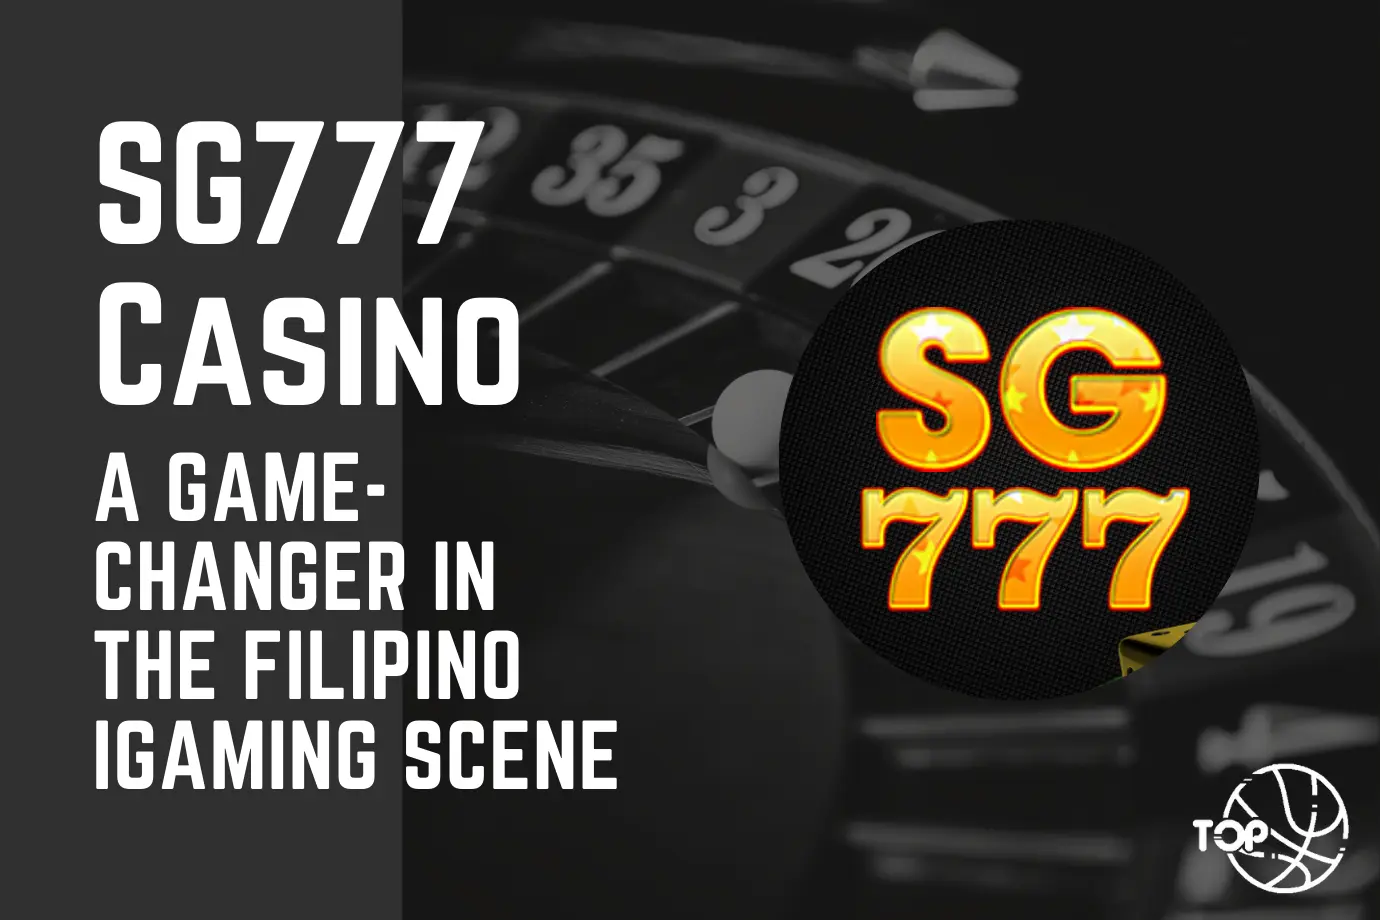 SG777 Casino: A Game-Changer in the Filipino iGaming Scene